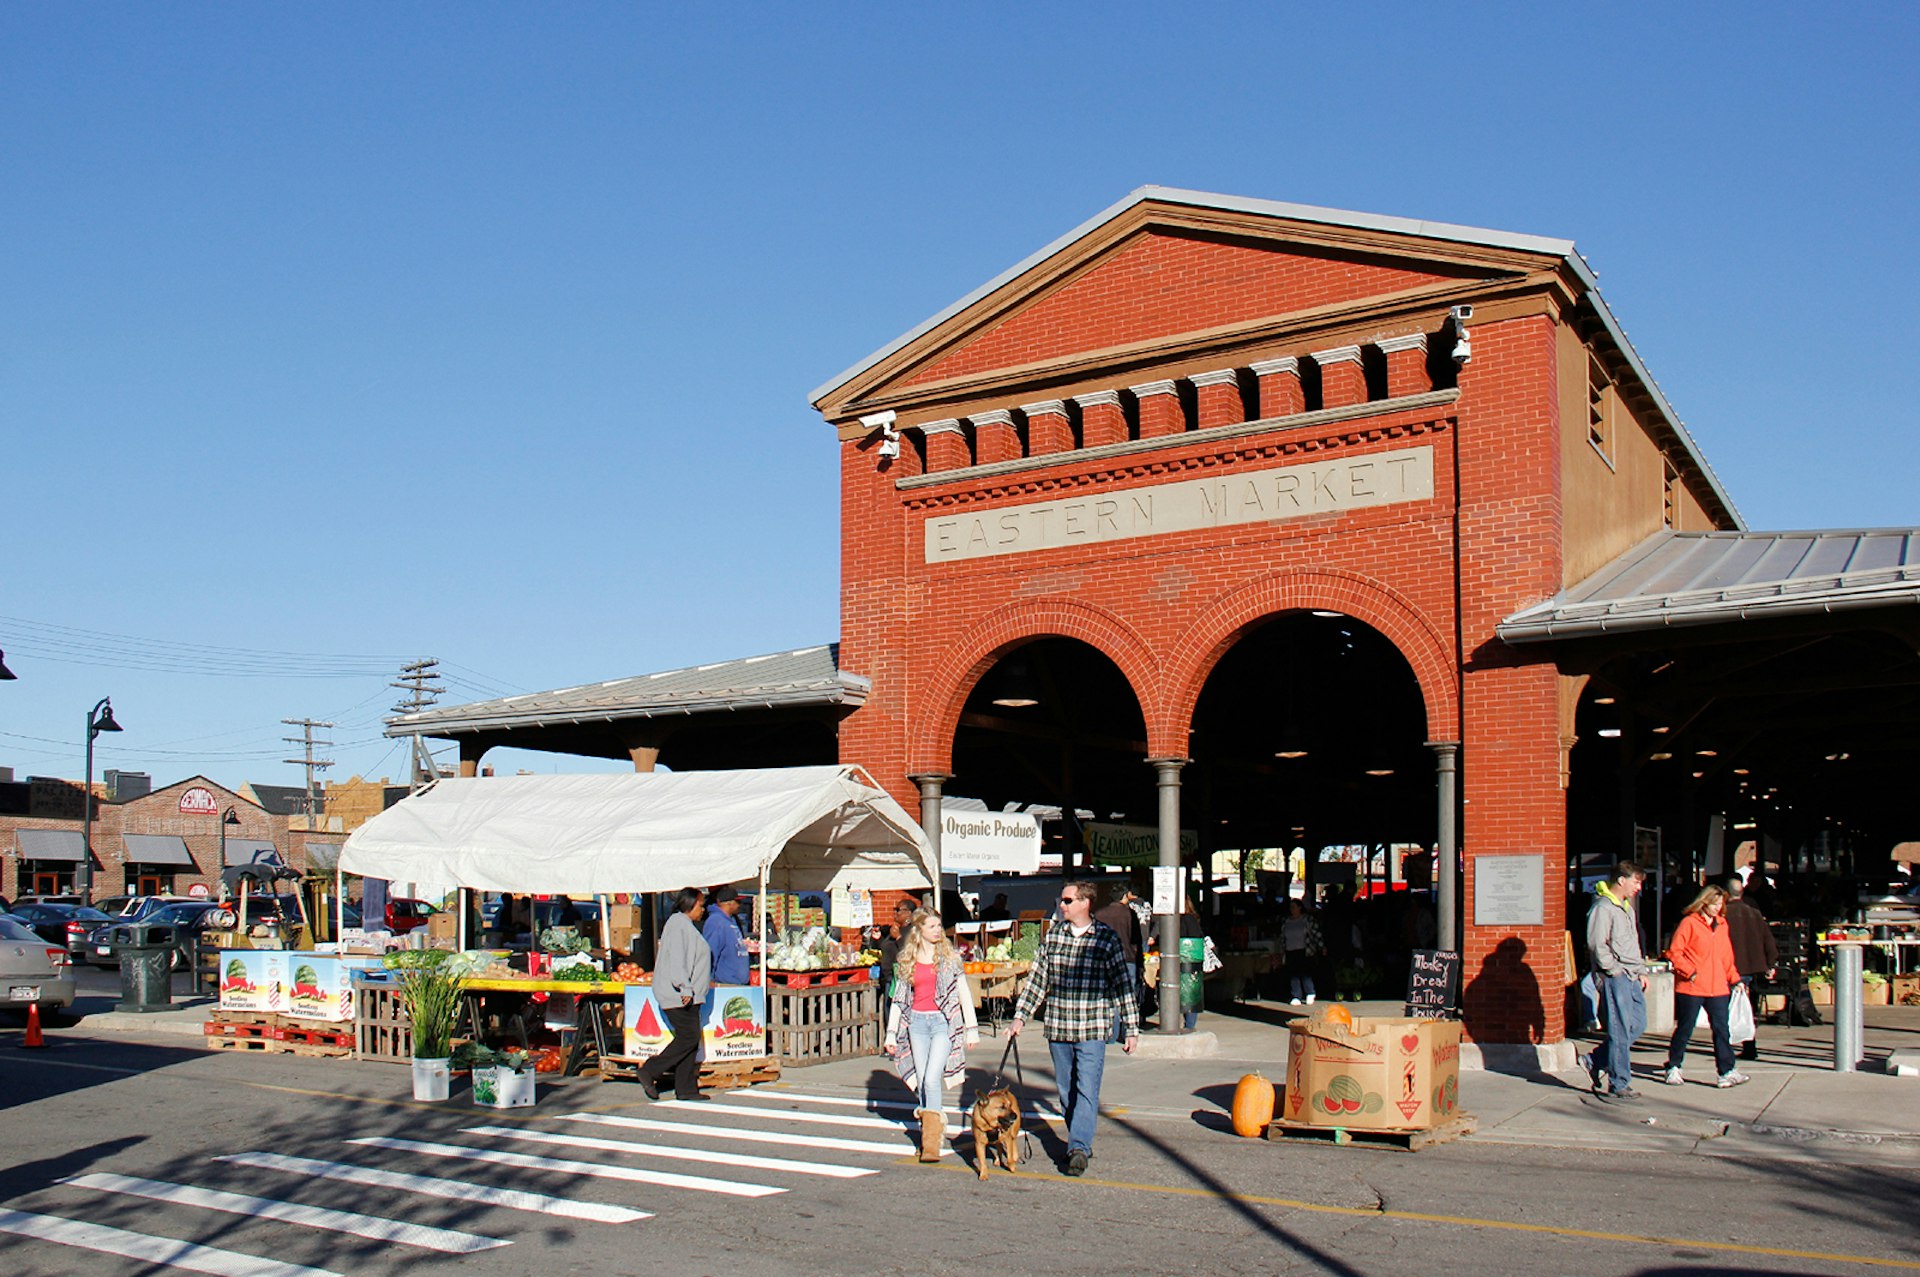 The front facade of Eastern Market in Detroit Michigan